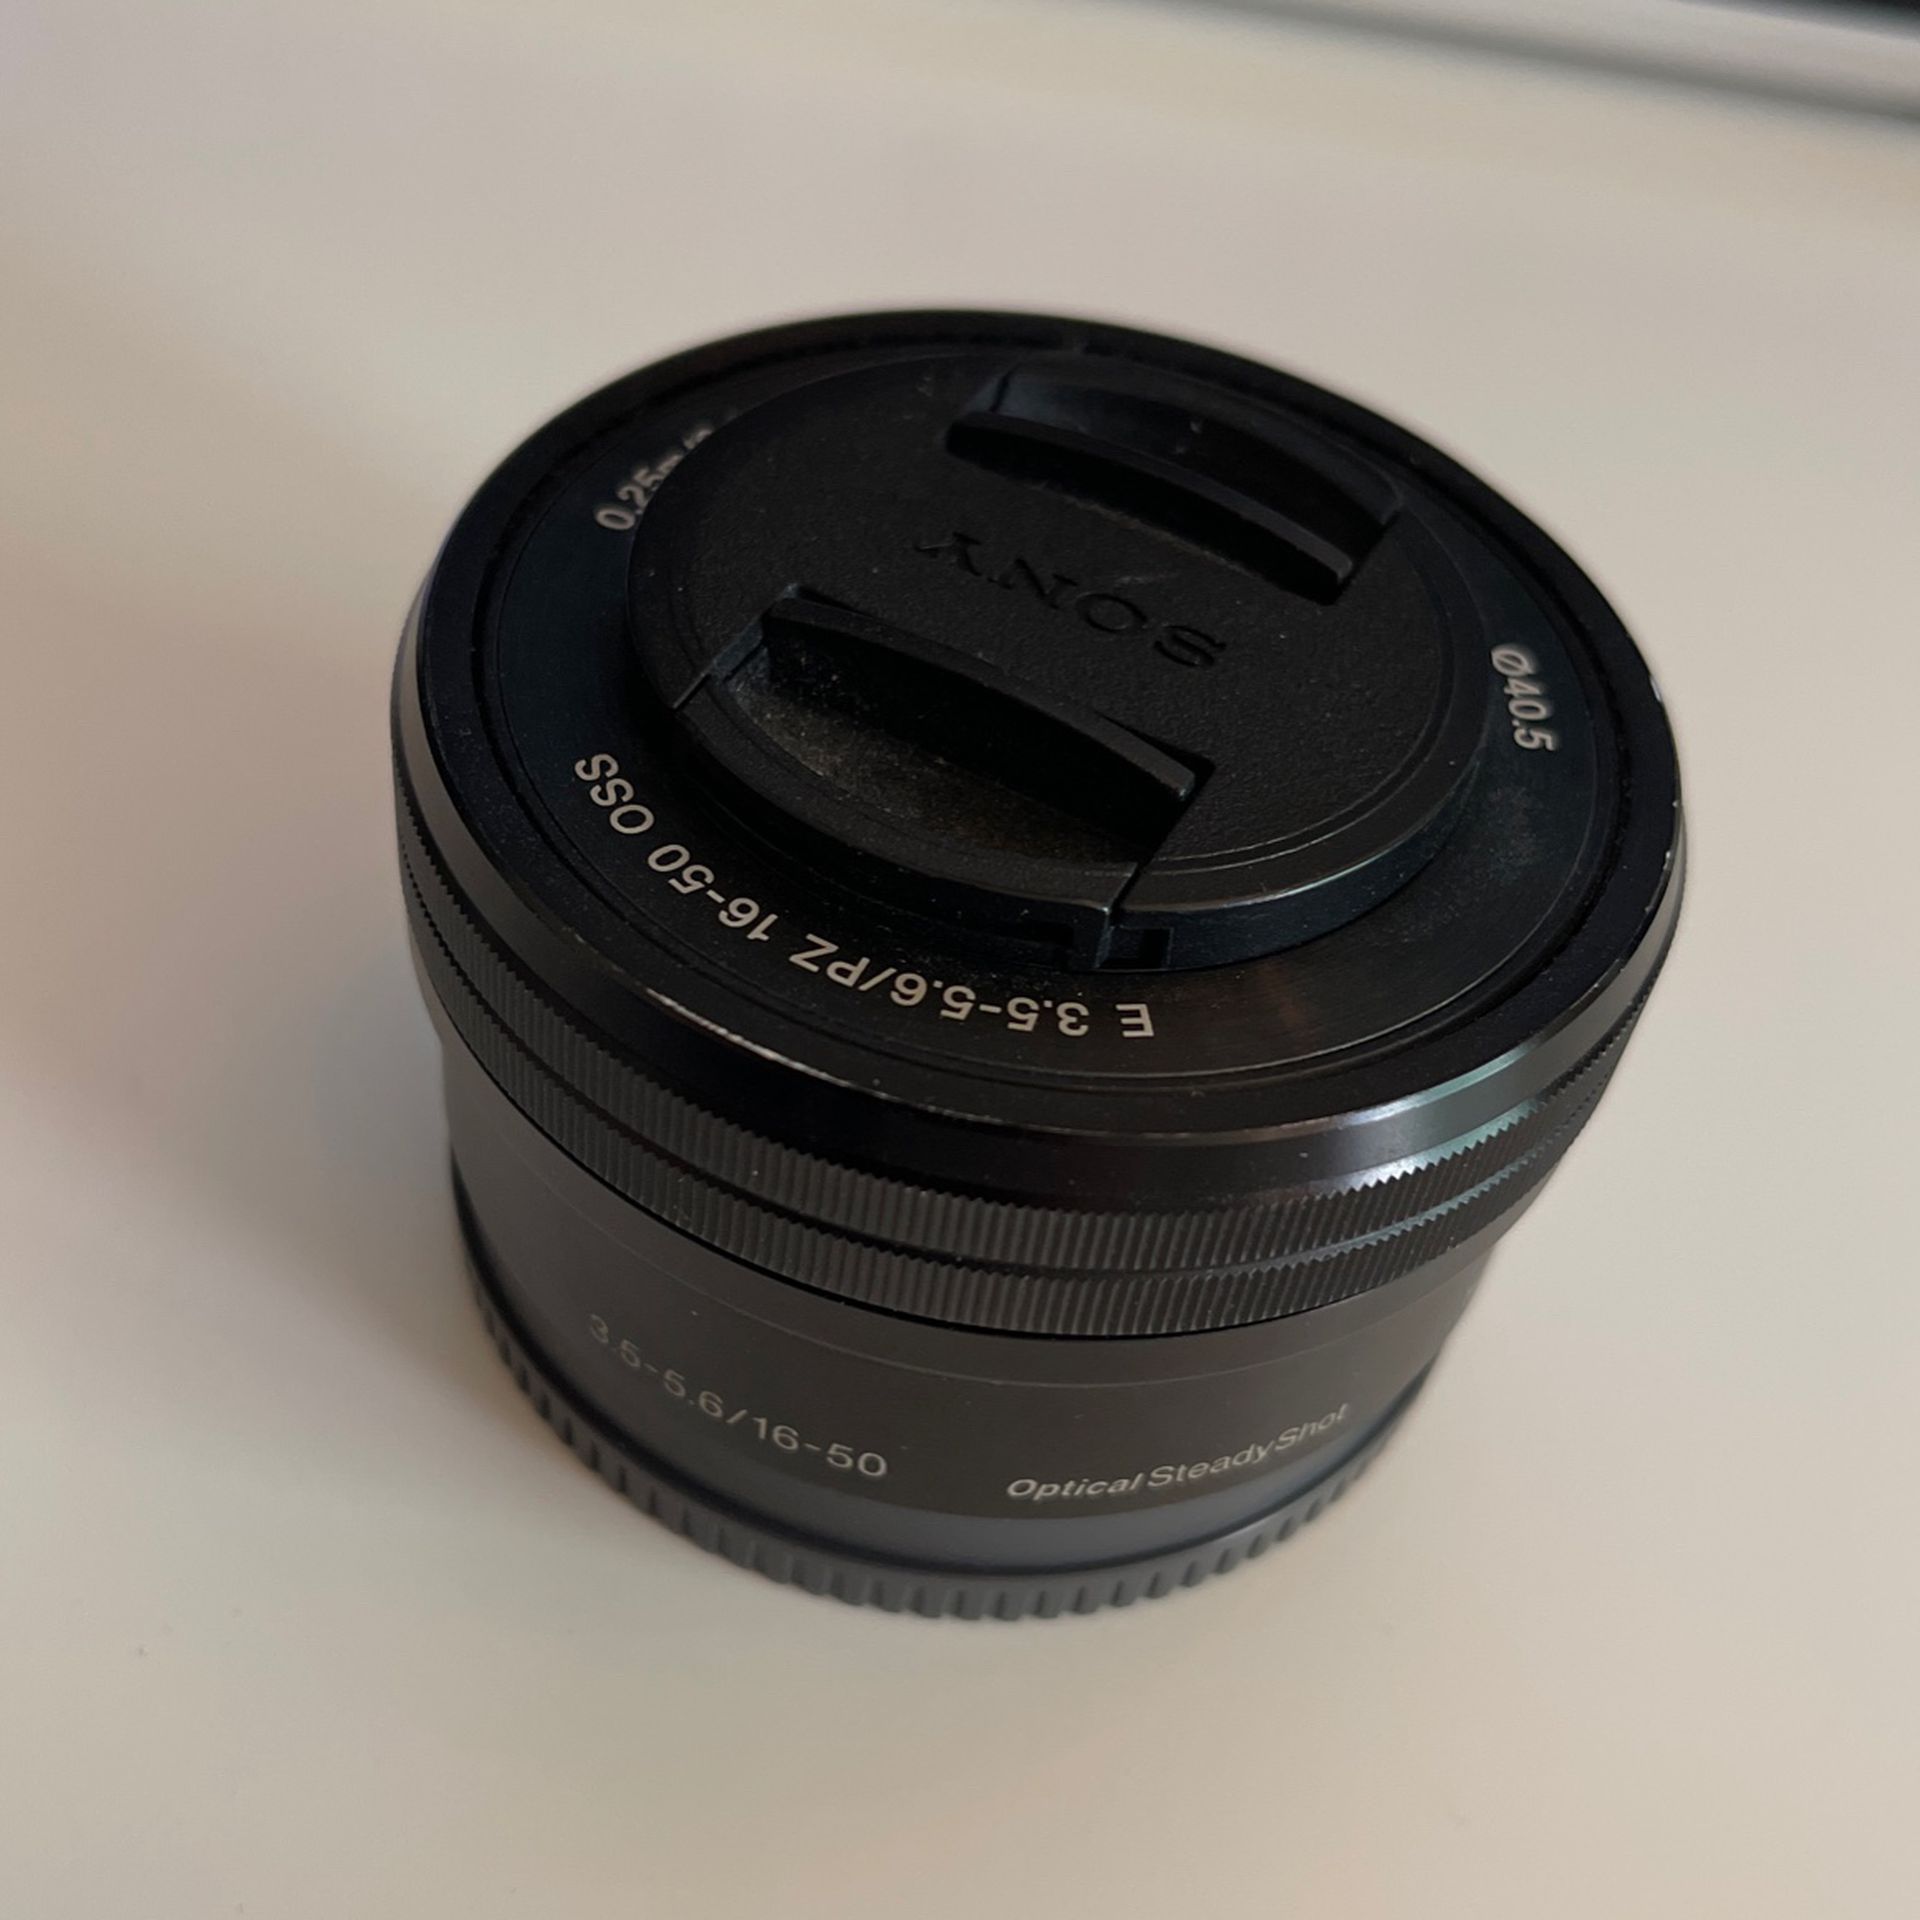 Sony 16-50 E-Mount Lens, 6(contact info removed) Grip